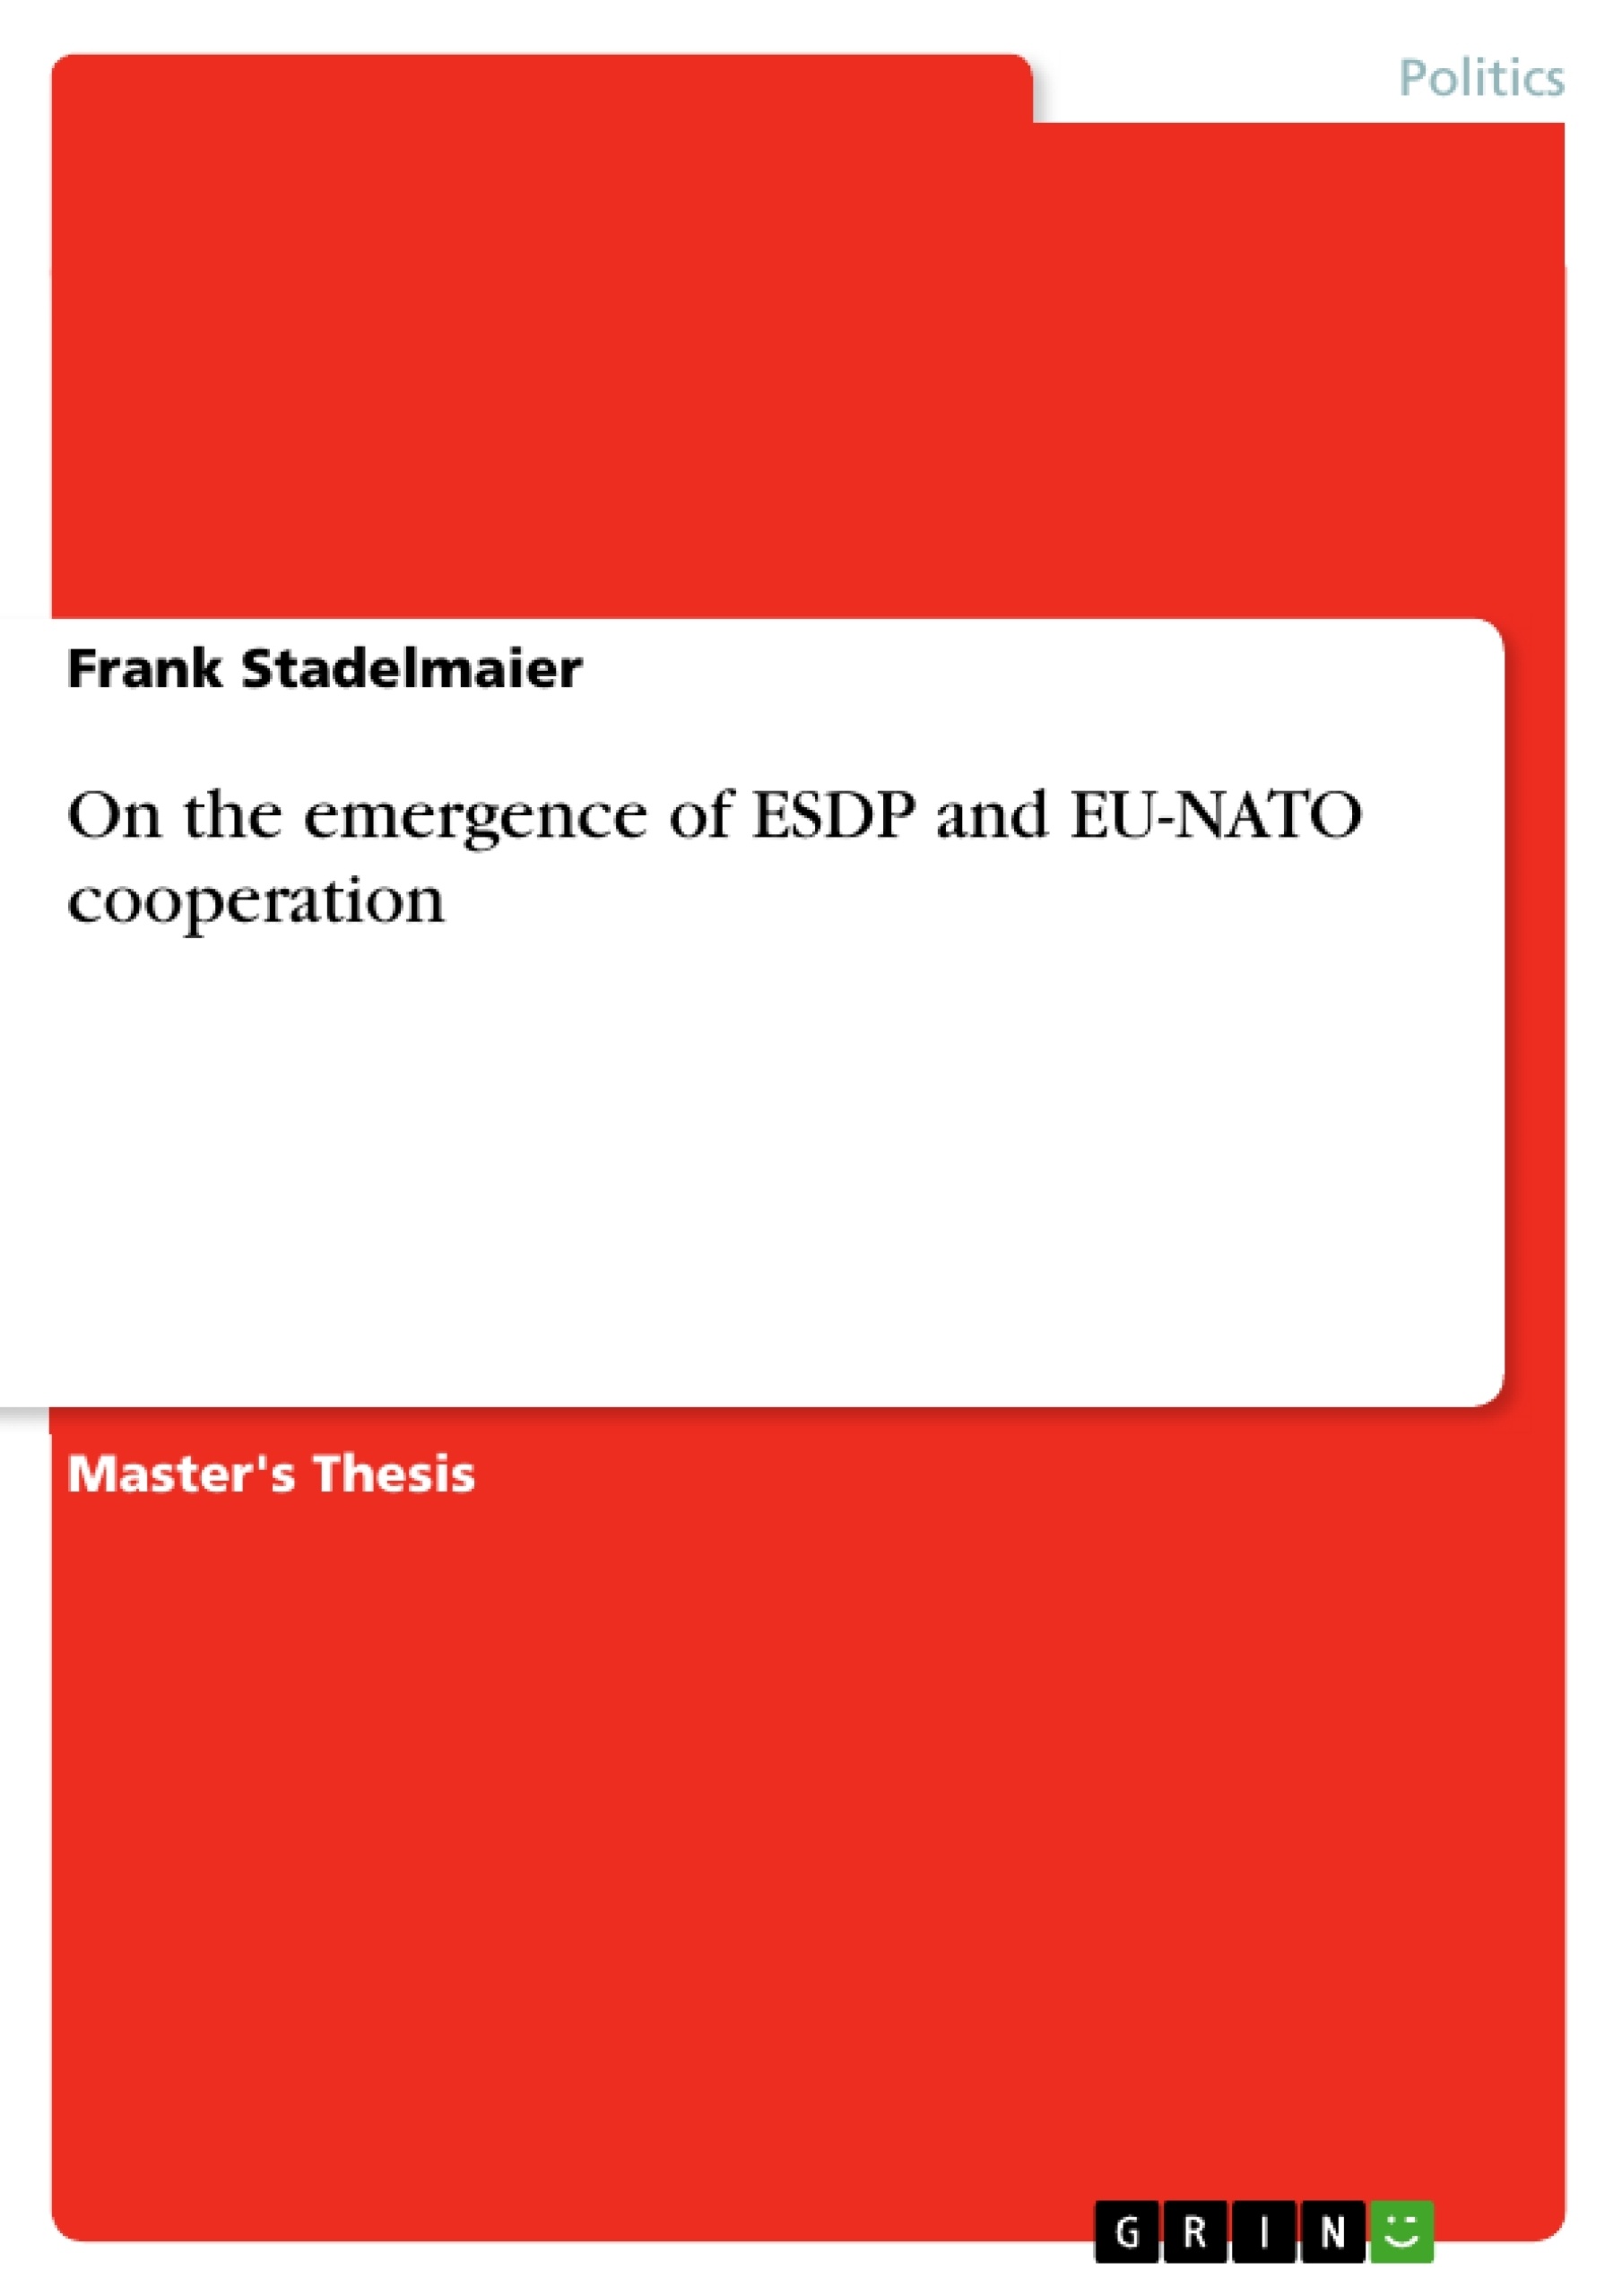 Title: On the emergence of ESDP and EU-NATO cooperation